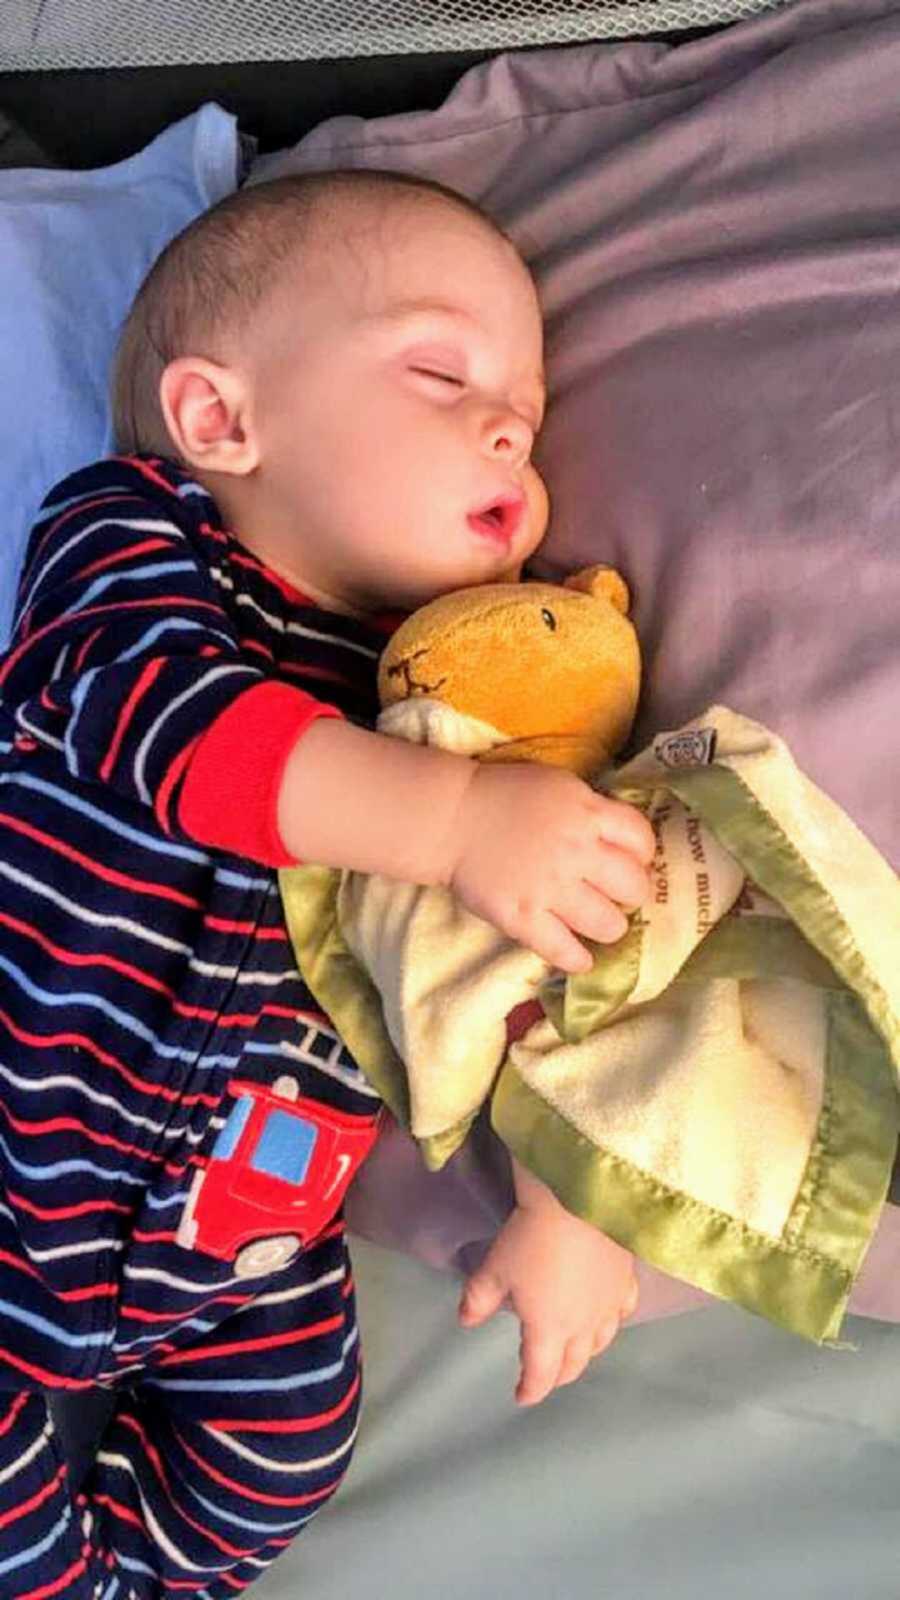 infant boy laying in bed holding a stuffed animal